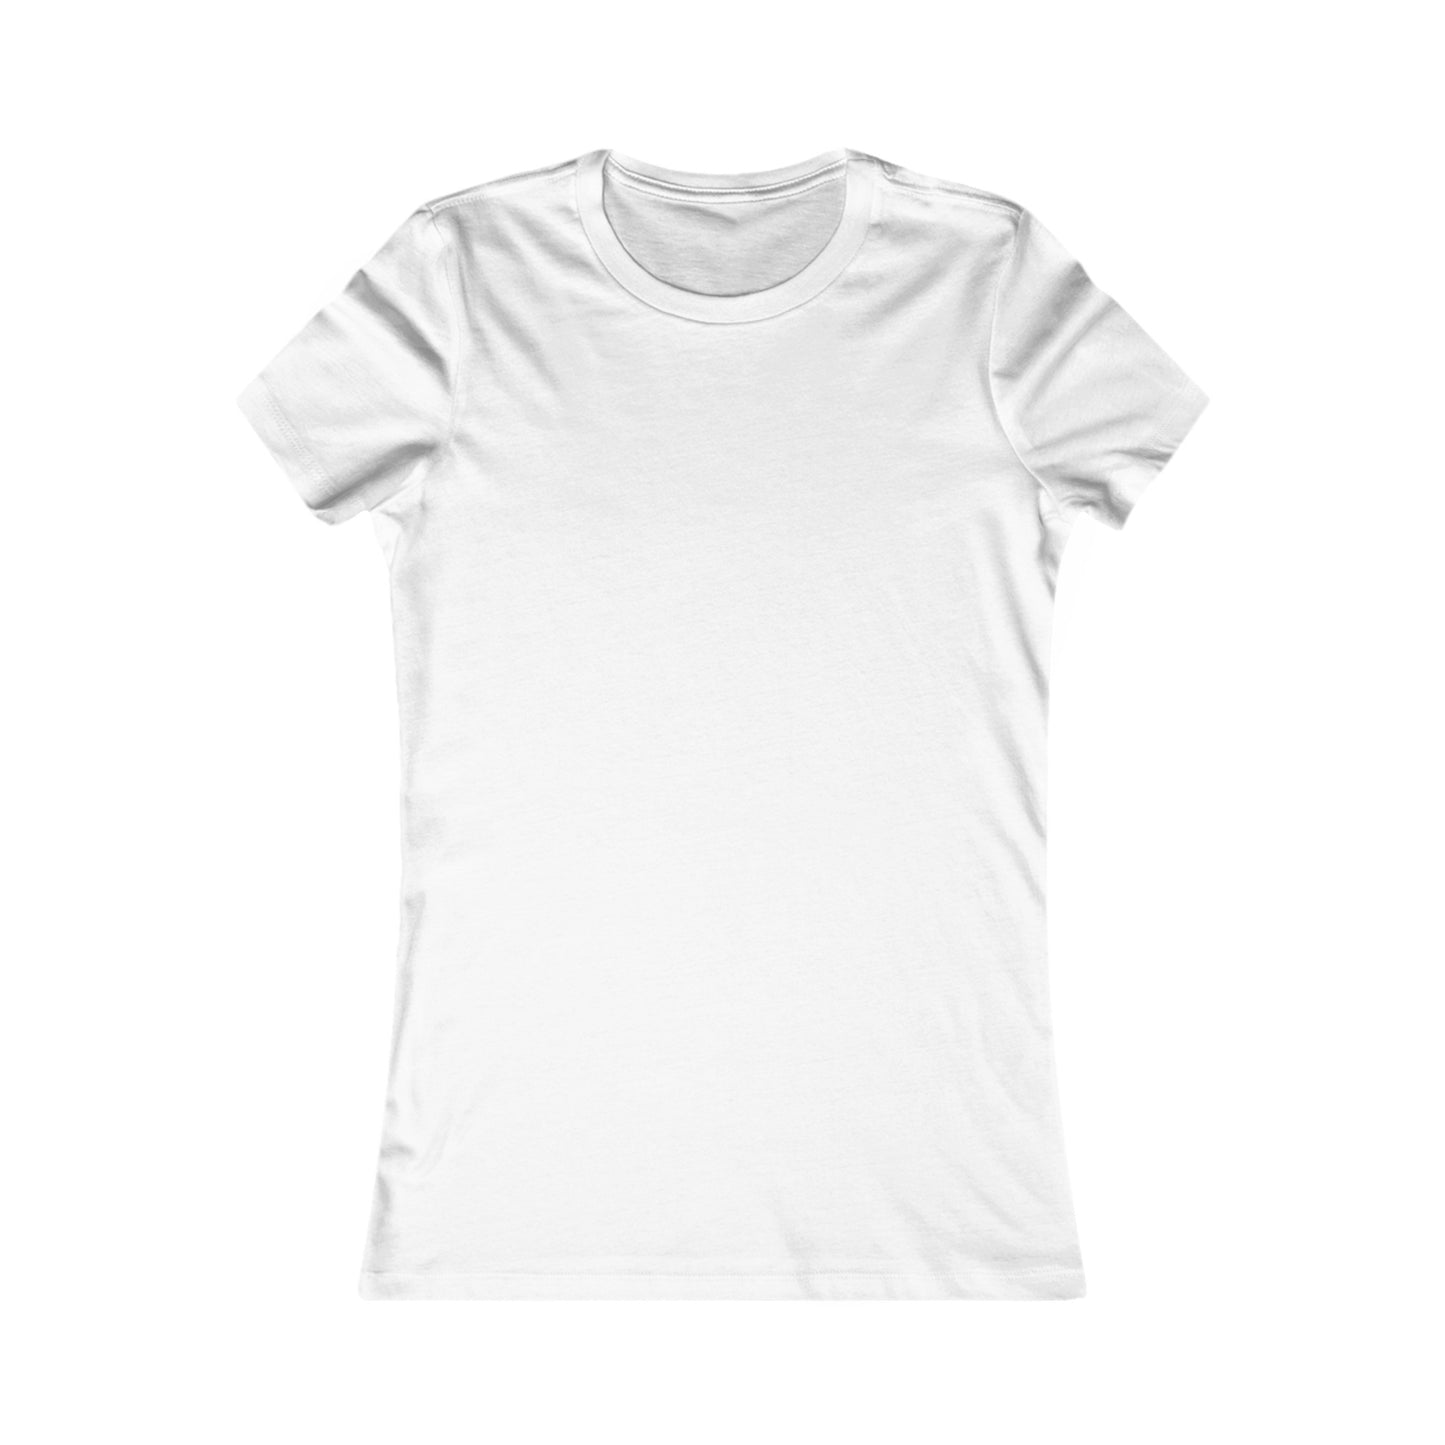 Purpose of Life Womens Fitted Tshirt (IW White Logo)